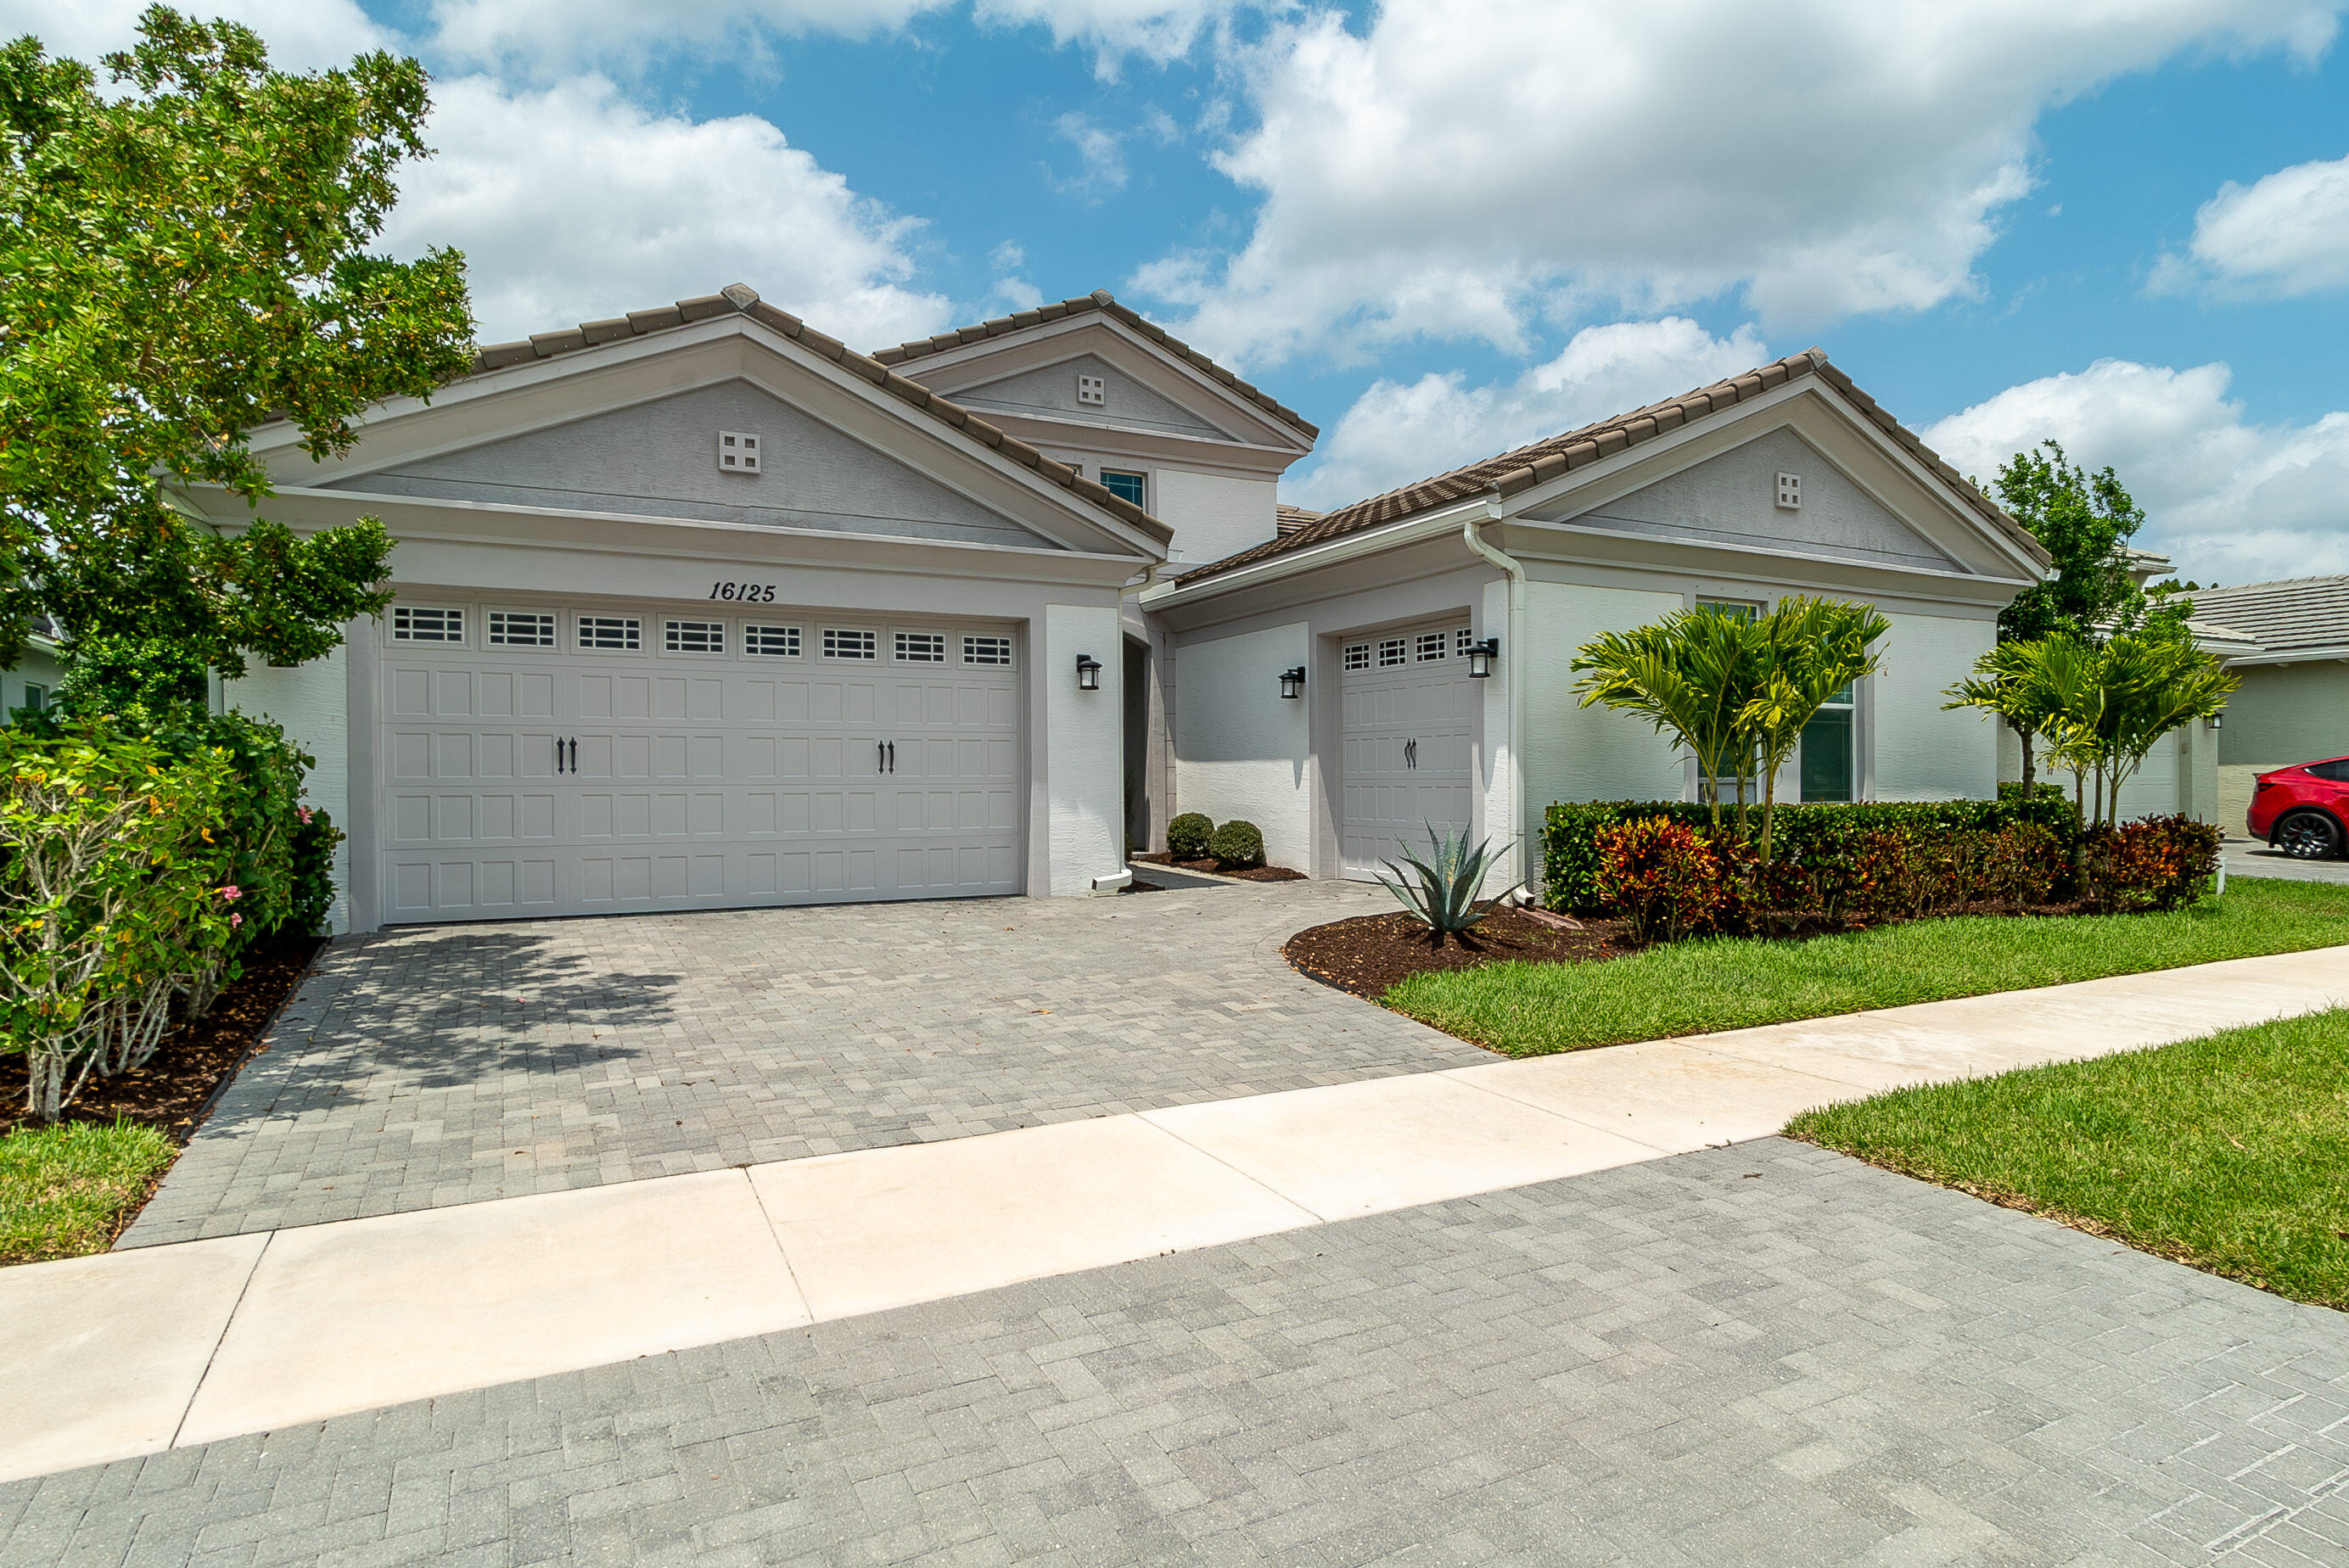 16125 Whippoorwill Circle, Westlake, Palm Beach County, Florida - 4 Bedrooms  
3 Bathrooms - 